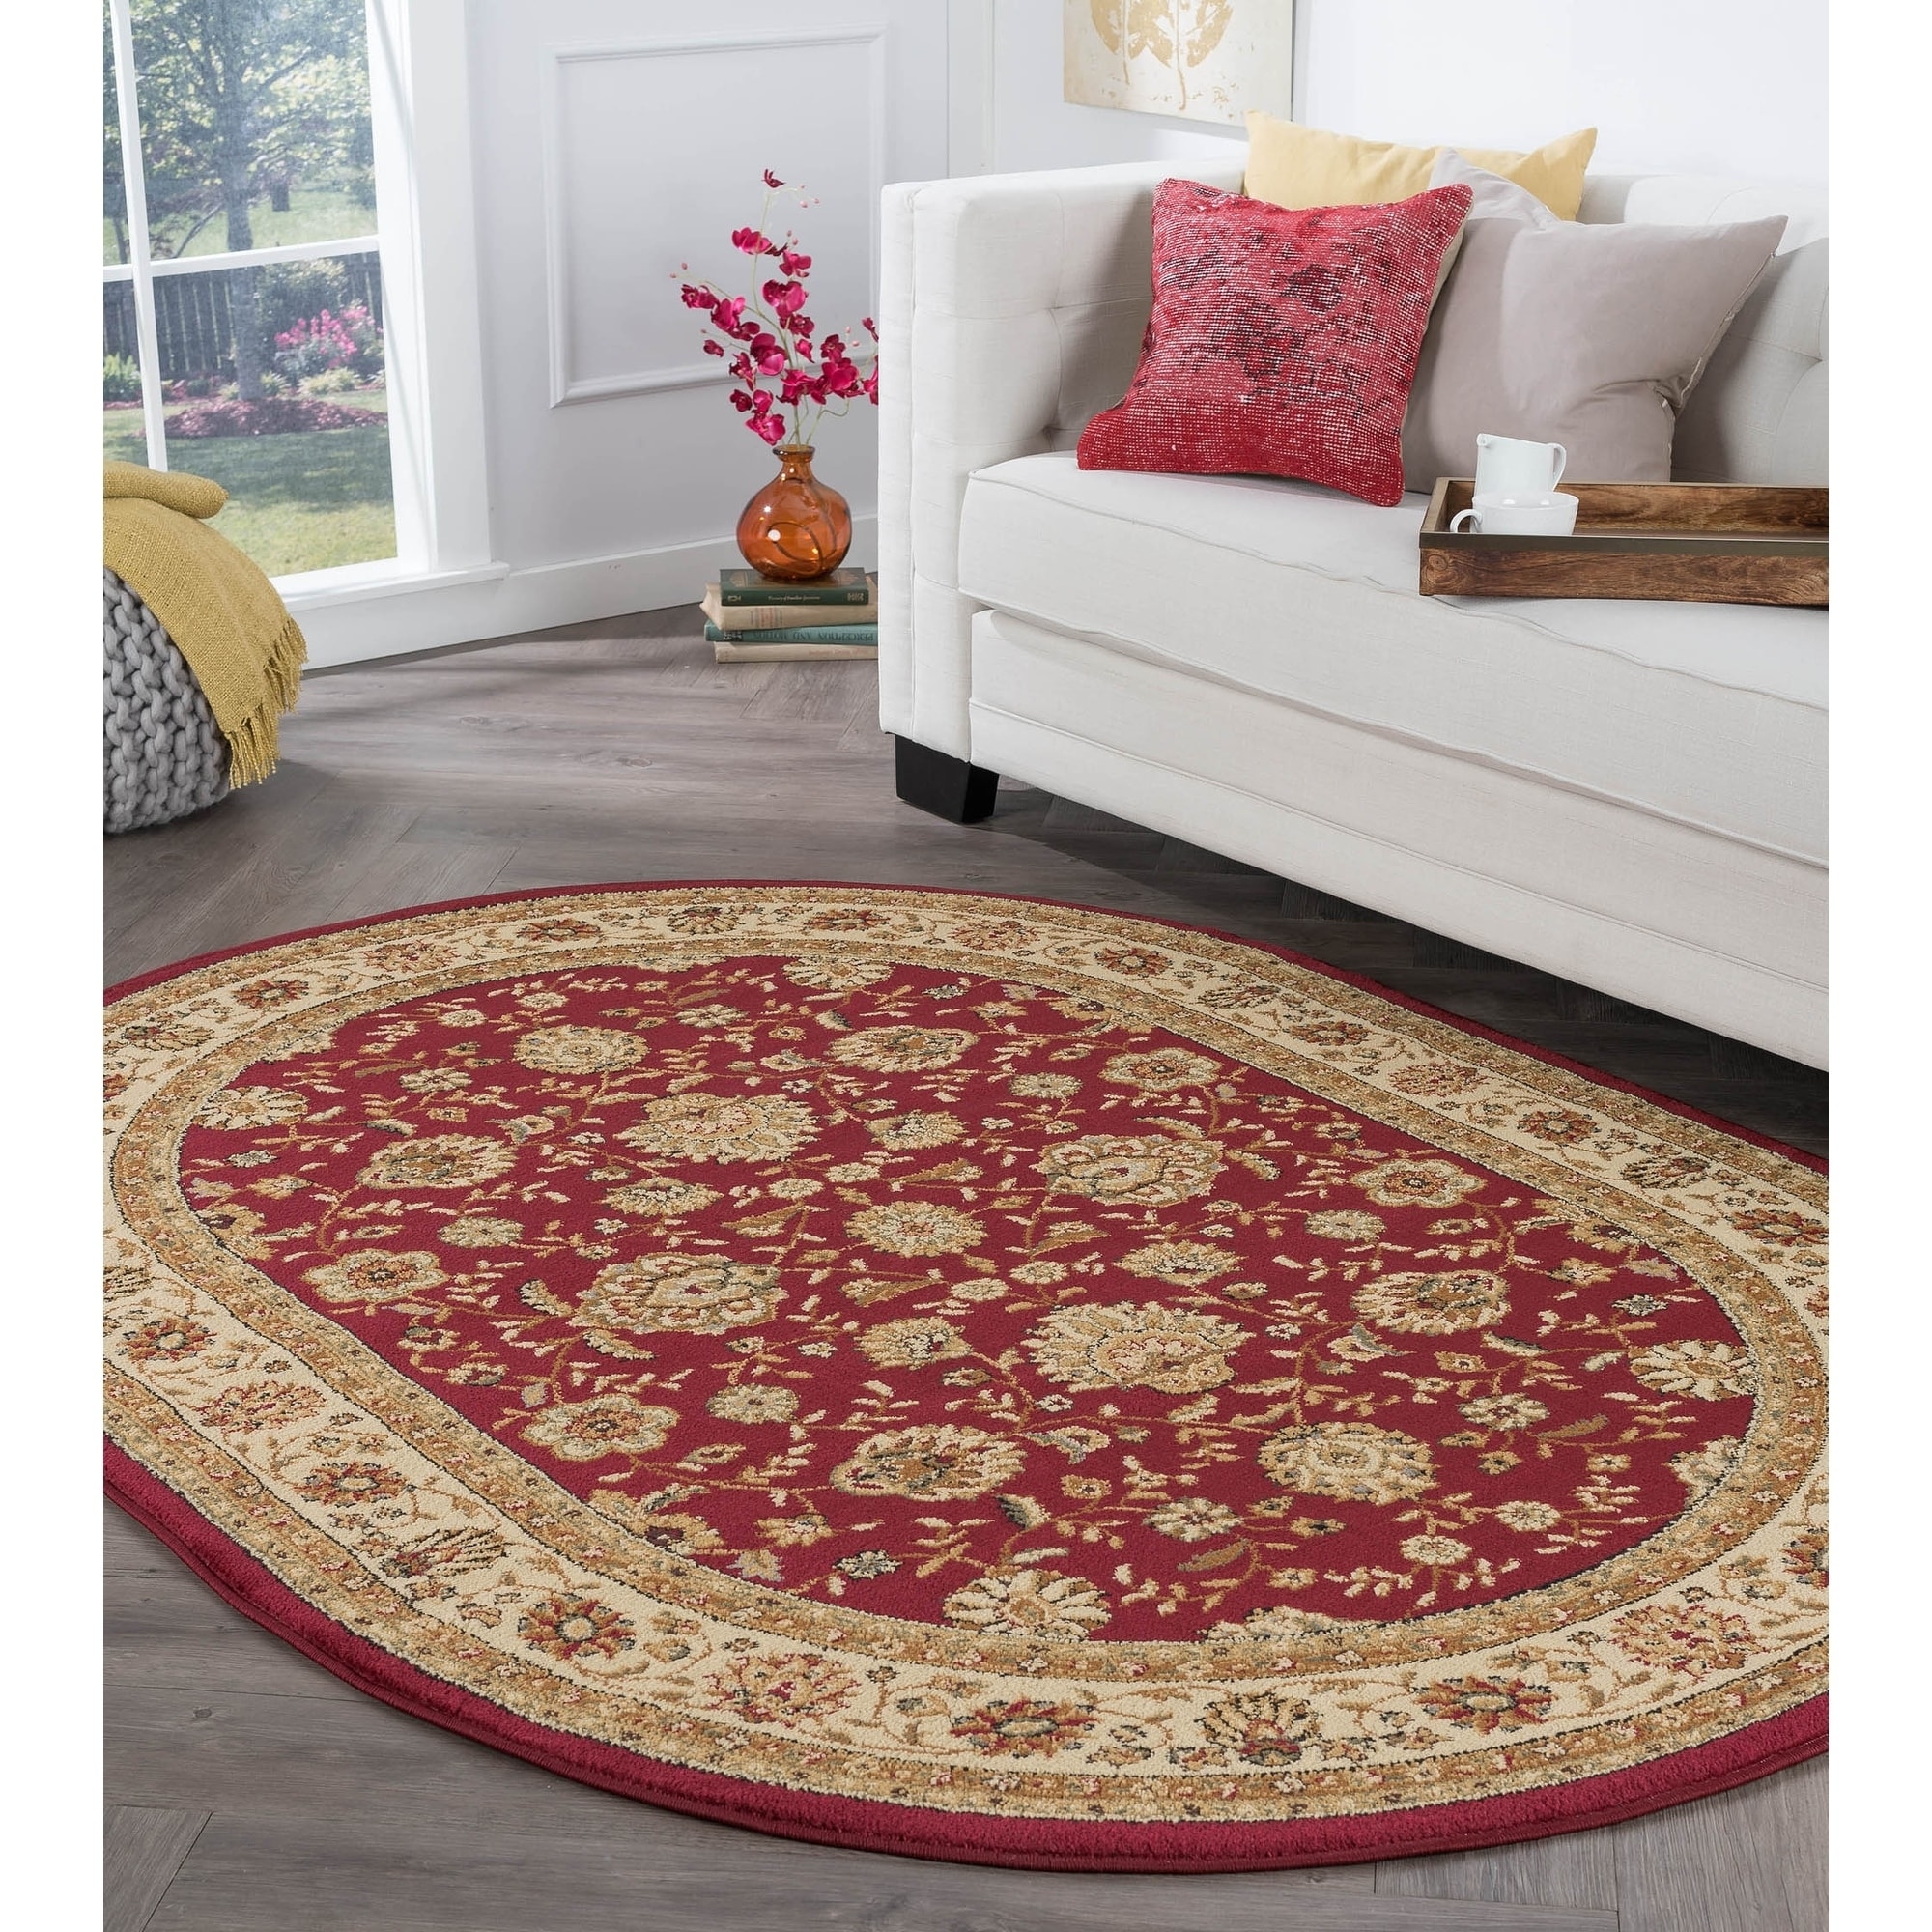 Rhythm 105140 Red Traditional Area Rug (5 3 X 7 3 Oval) (RedSecondary Colors Beige, black, greenShape OvalTip We recommend the use of a non skid pad to keep the rug in place on smooth surfaces.All rug sizes are approximate. Due to the difference of mon